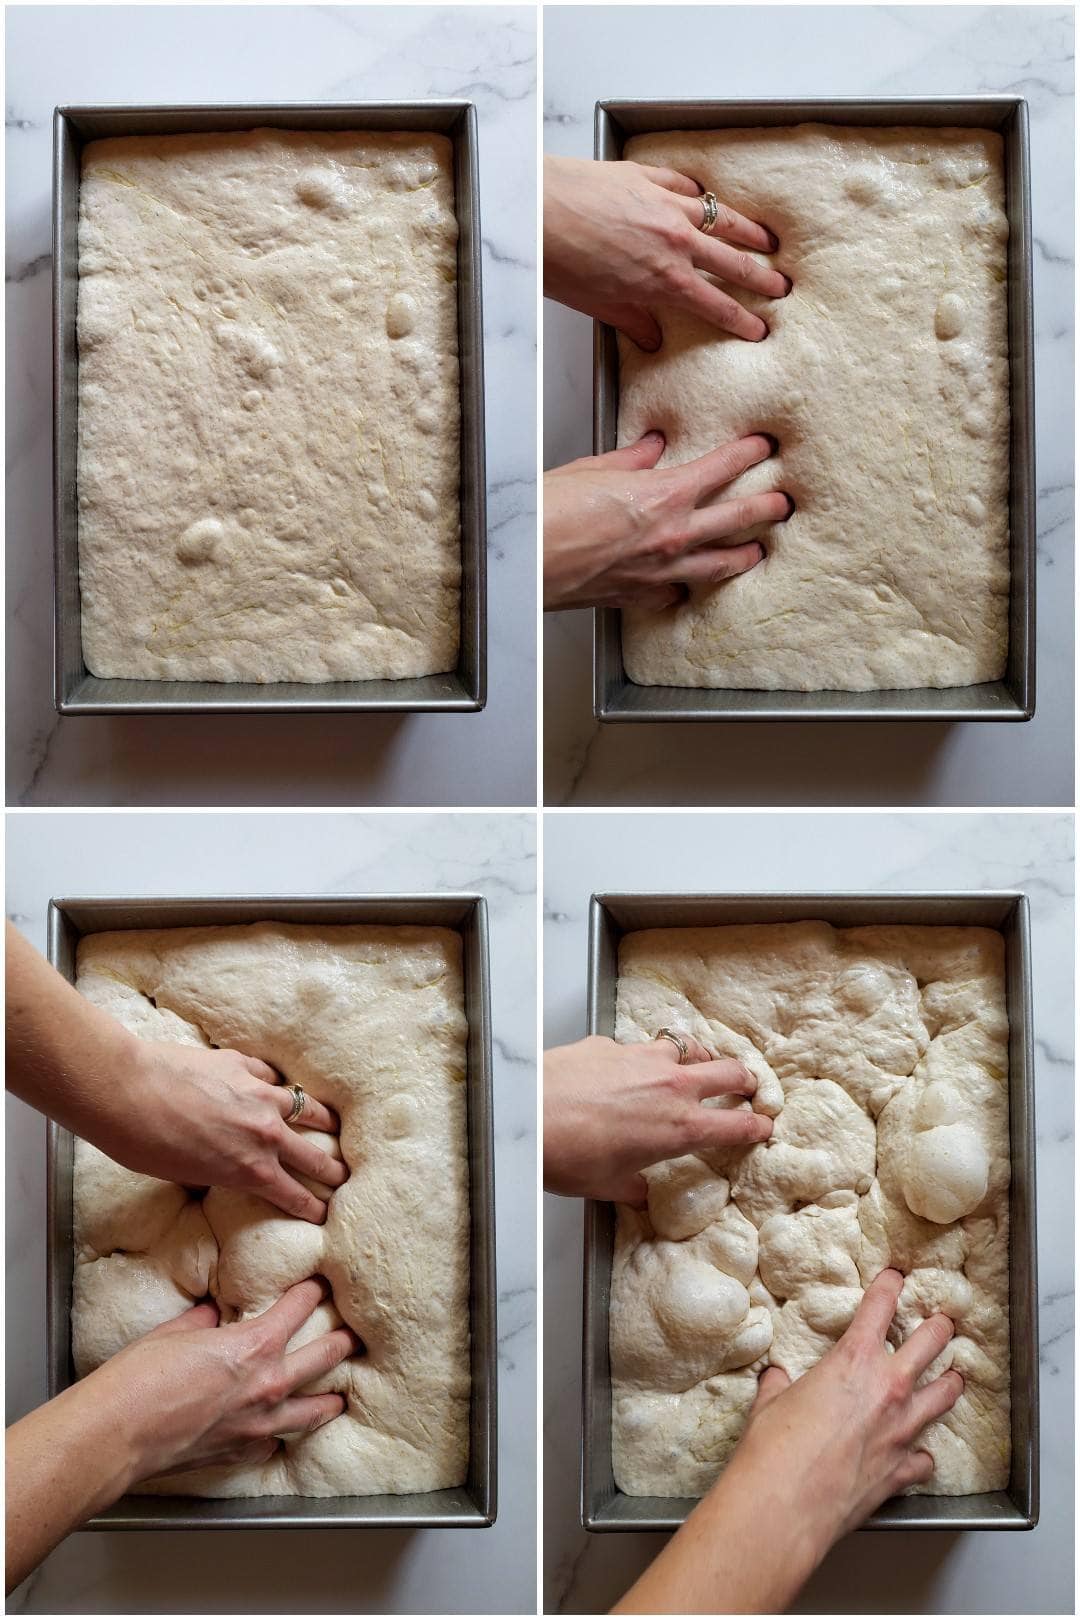 A four part image collage, the first image shows the sourdough focaccia dough after it has risen inside the baking pan. There are some air bubbles that have formed and the dough is fairly pillowy. The second image shows a set of hands with her fingers inserted into a portion of the dough, essentially poking it. The third image shows hands continuing to poke the dough using every finger, and the fourth image shows the hands continuing to poke the dough. The dough has continued to get more airy, bubbly, and pillowy the more times it has been poked from the first image to the fourth image.